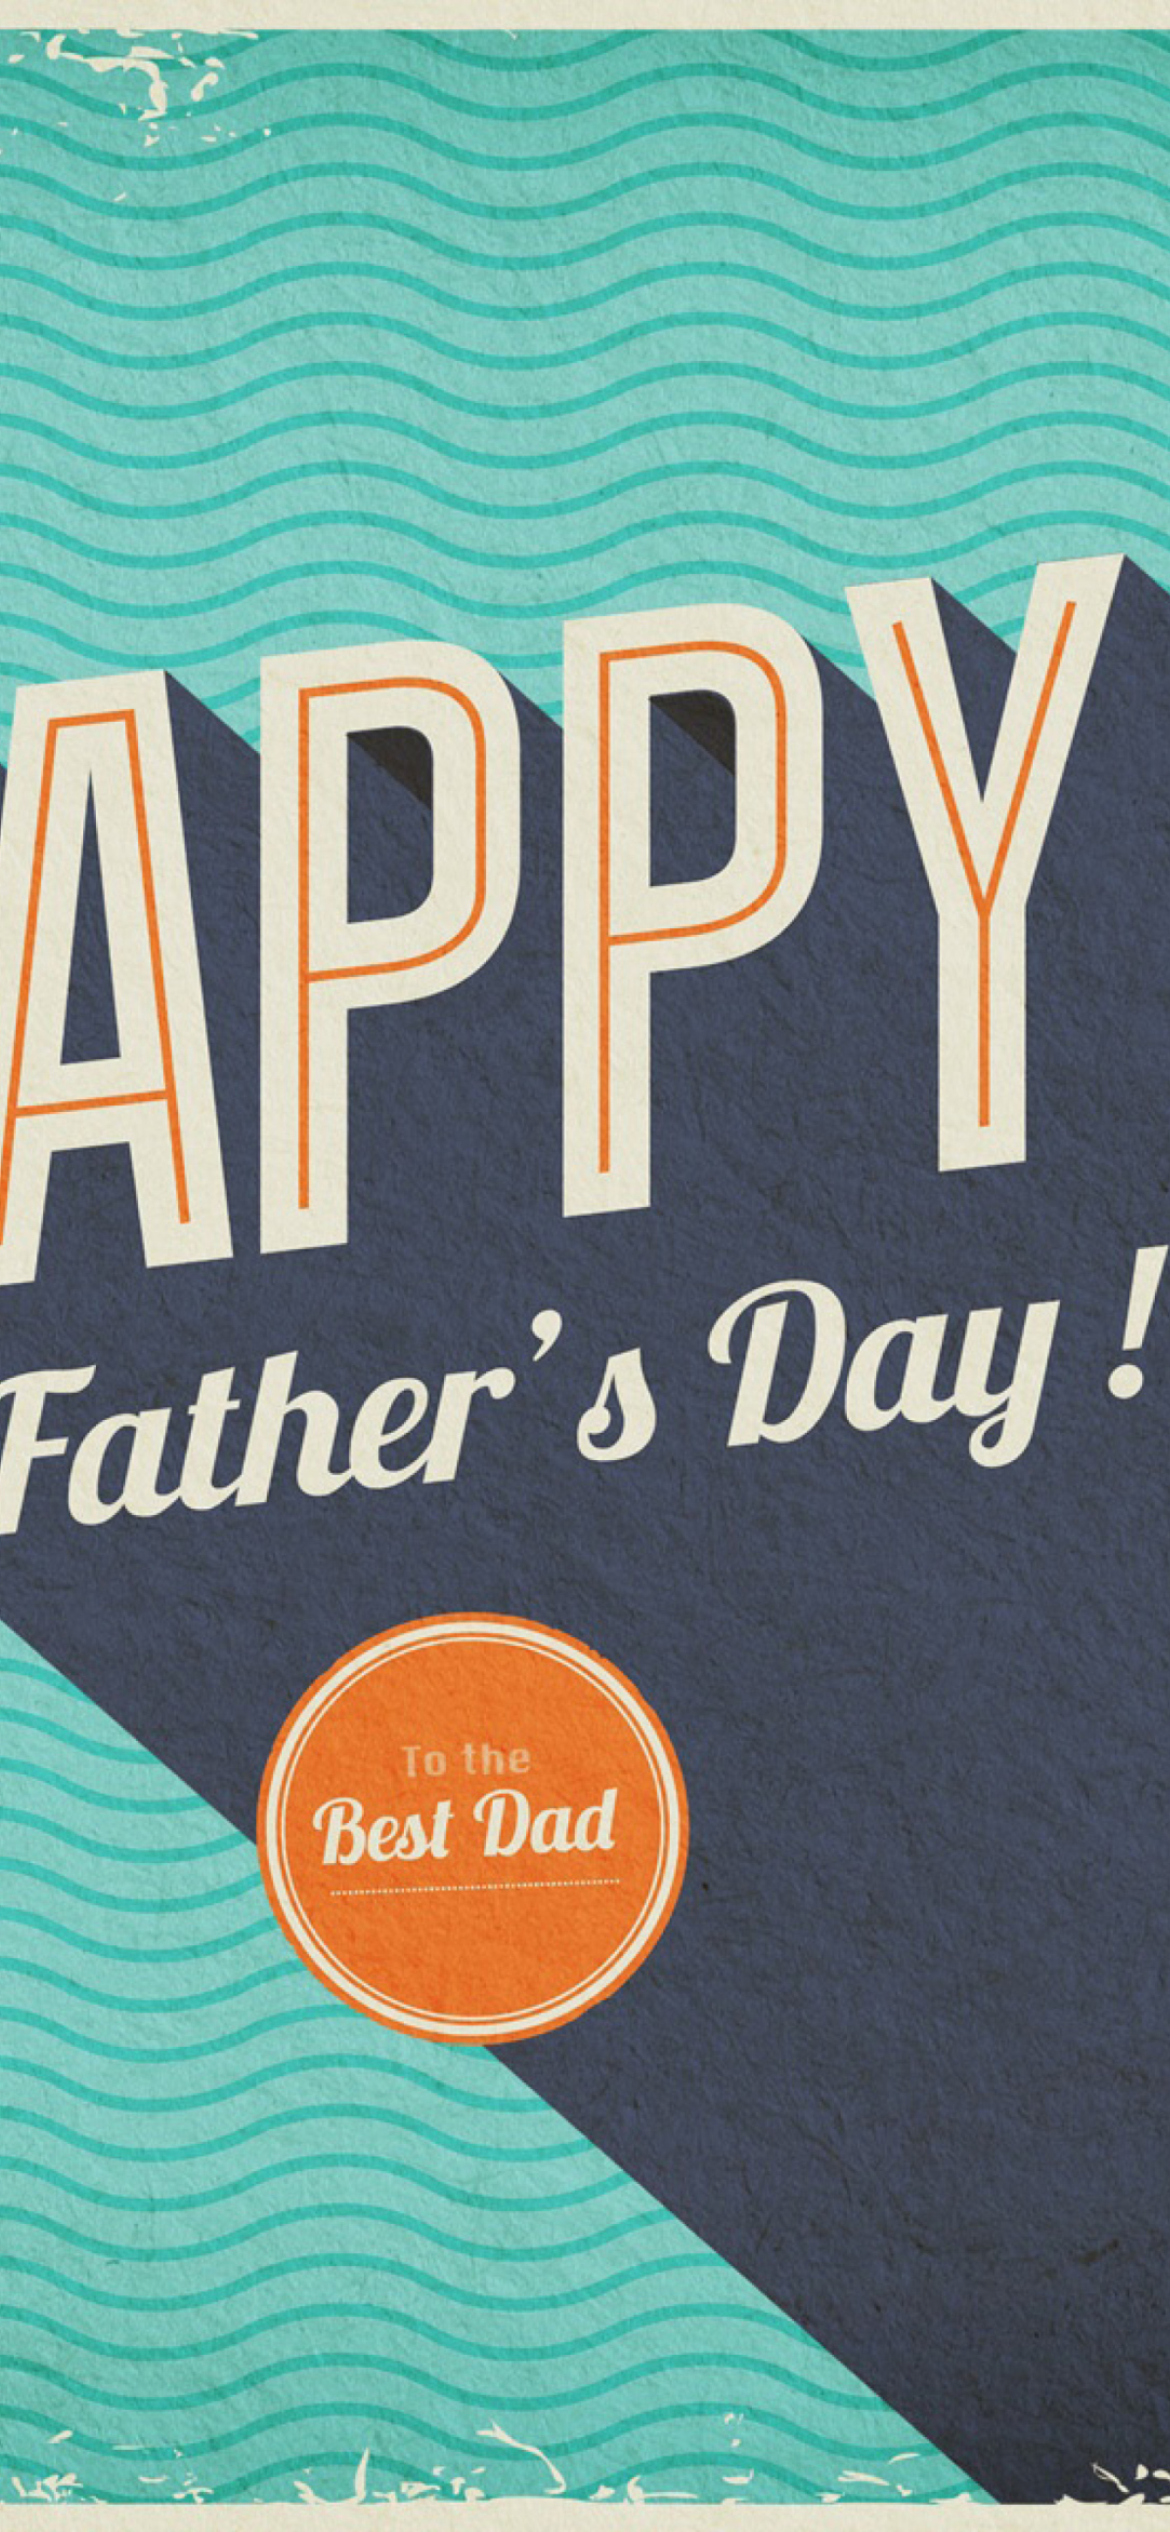 Happy Fathers Day wallpaper 1170x2532